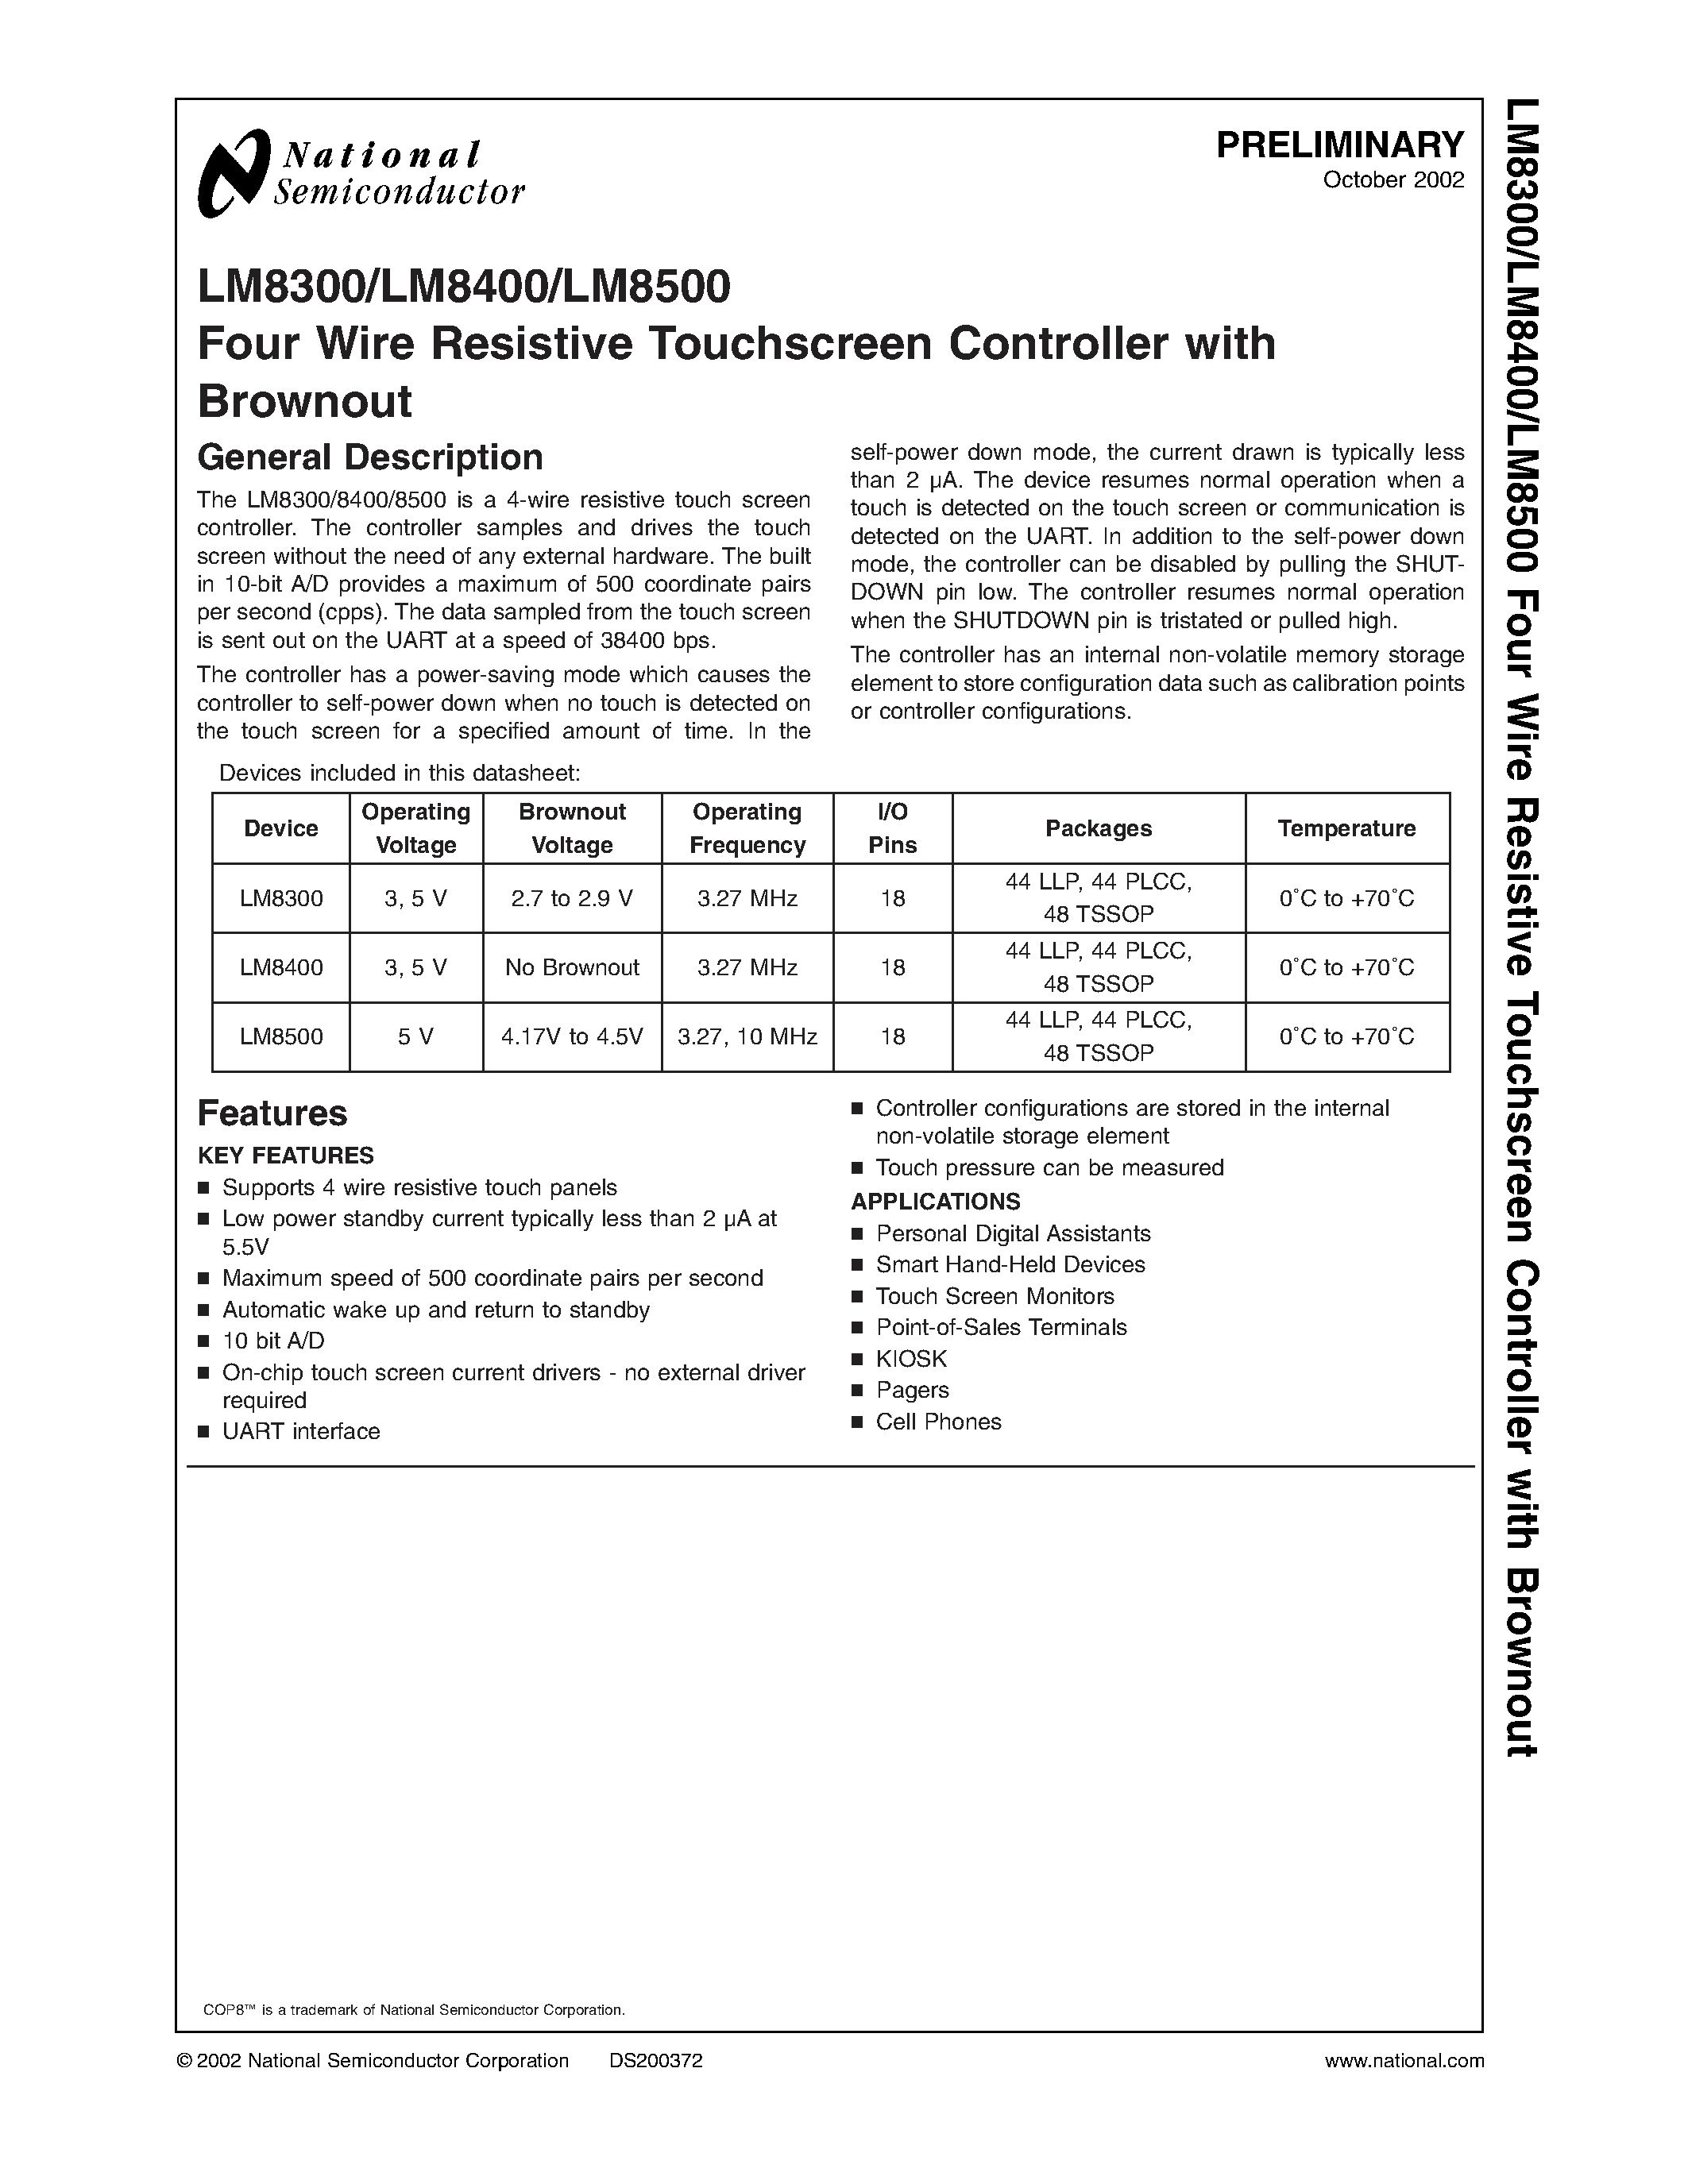 Datasheet LM8400 - Four Wire Resistive Touchscreen Controller with Brownout page 1